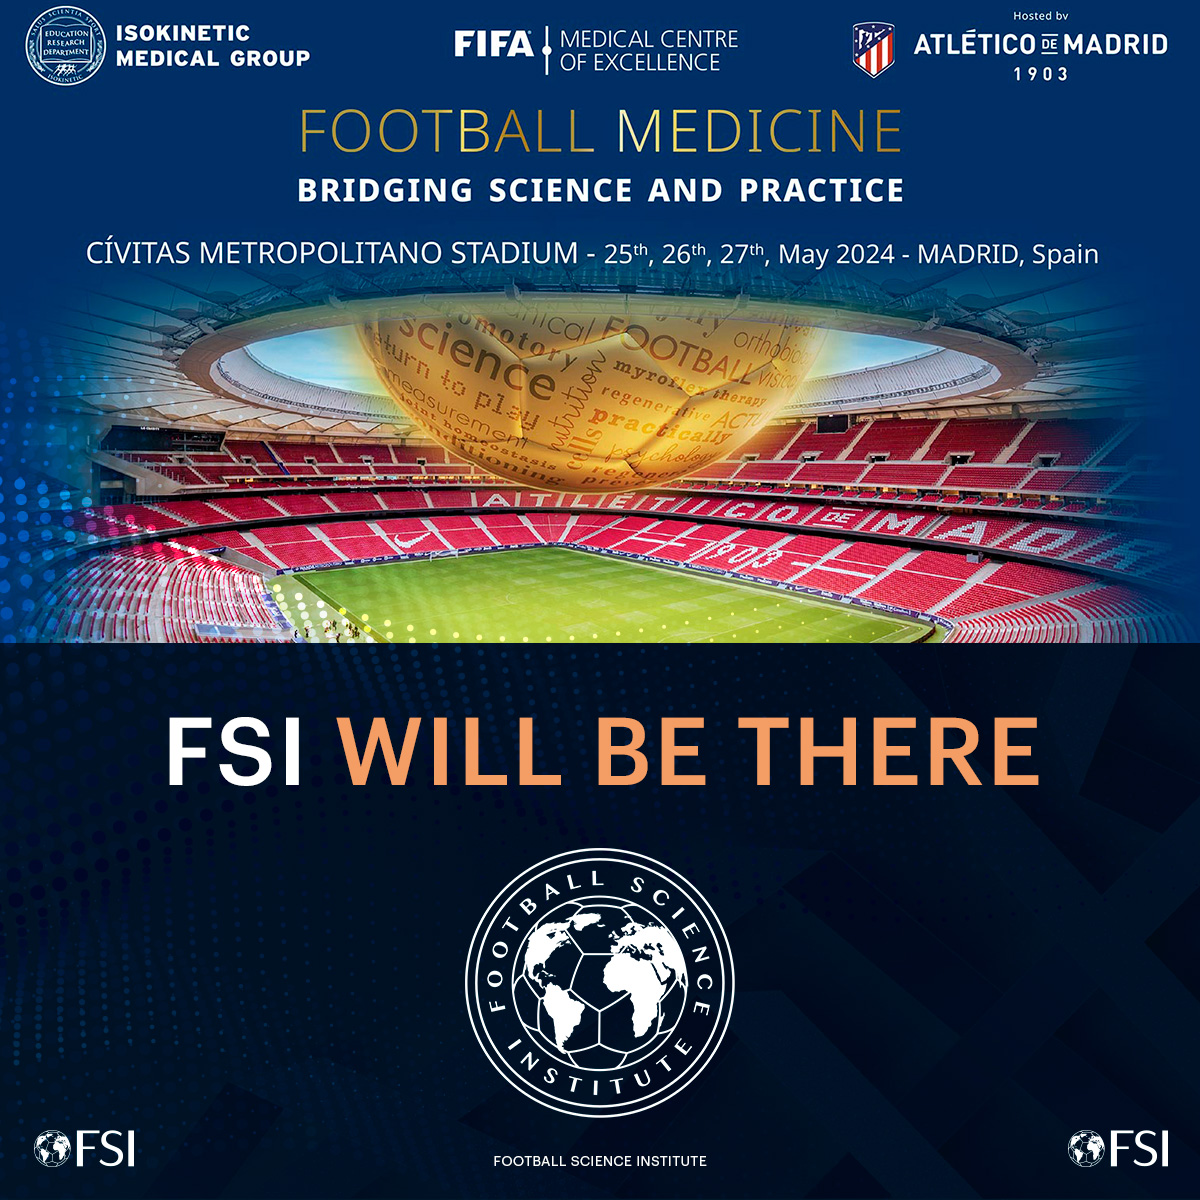 🎉 We're thrilled to announce that the Football Science Institute will be participating in the Football Medicine conference hosted by @footballmed ! 🔍 Visit us at web.fsi.training/masters/ #FootballScience #SportsMedicine #IsokineticConference